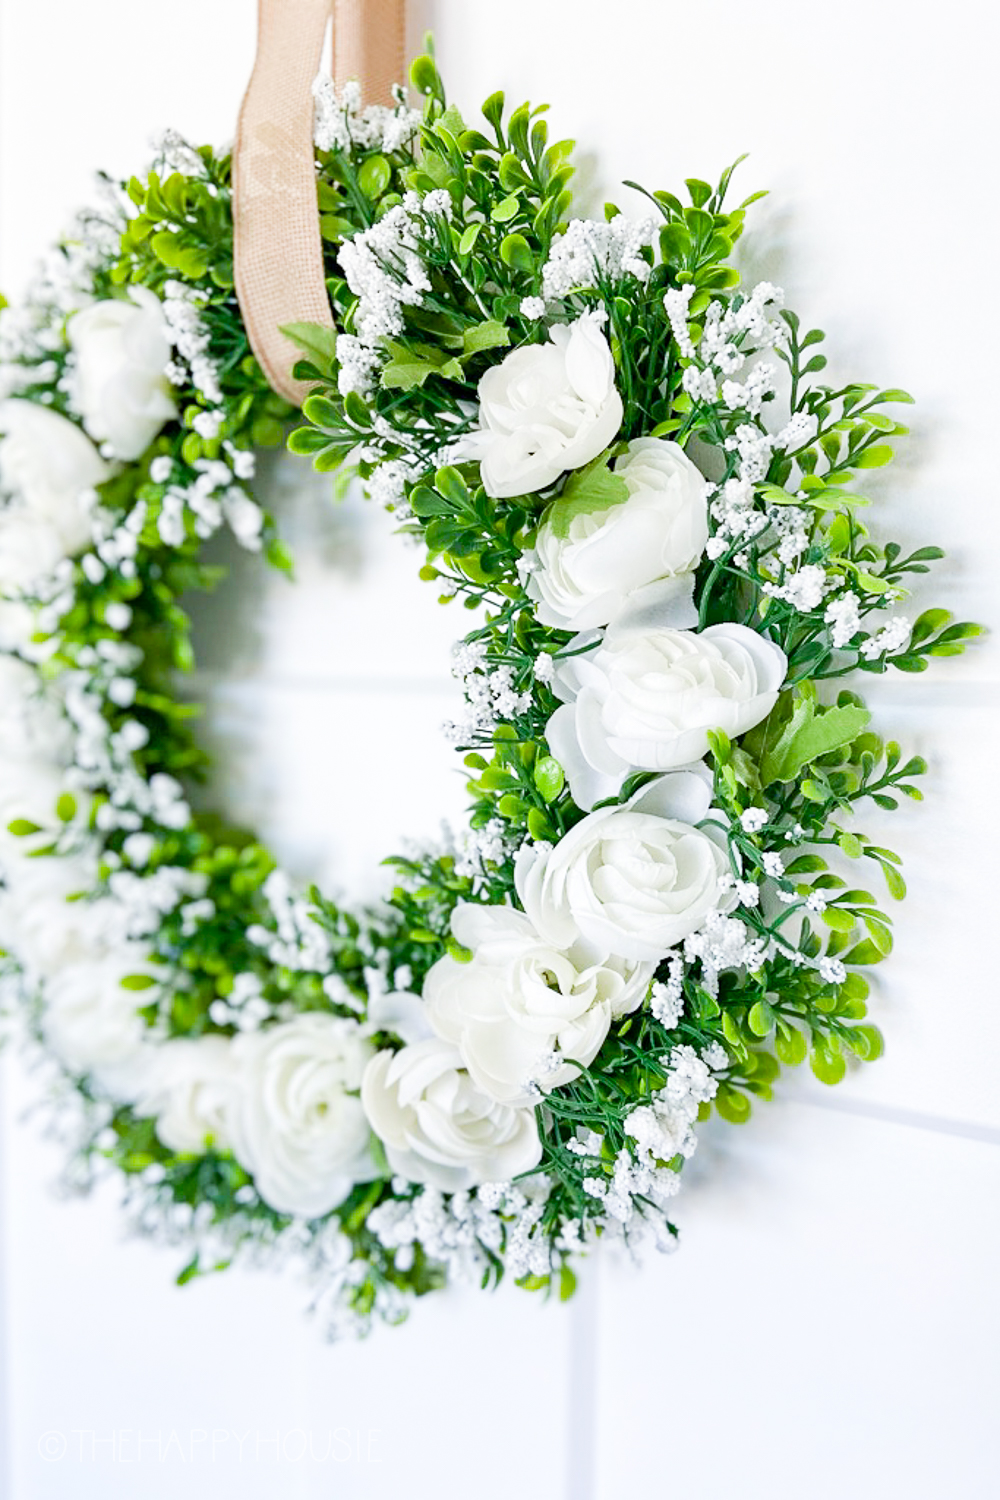 The babys breath, and white roses with the green leaves on the wreath.